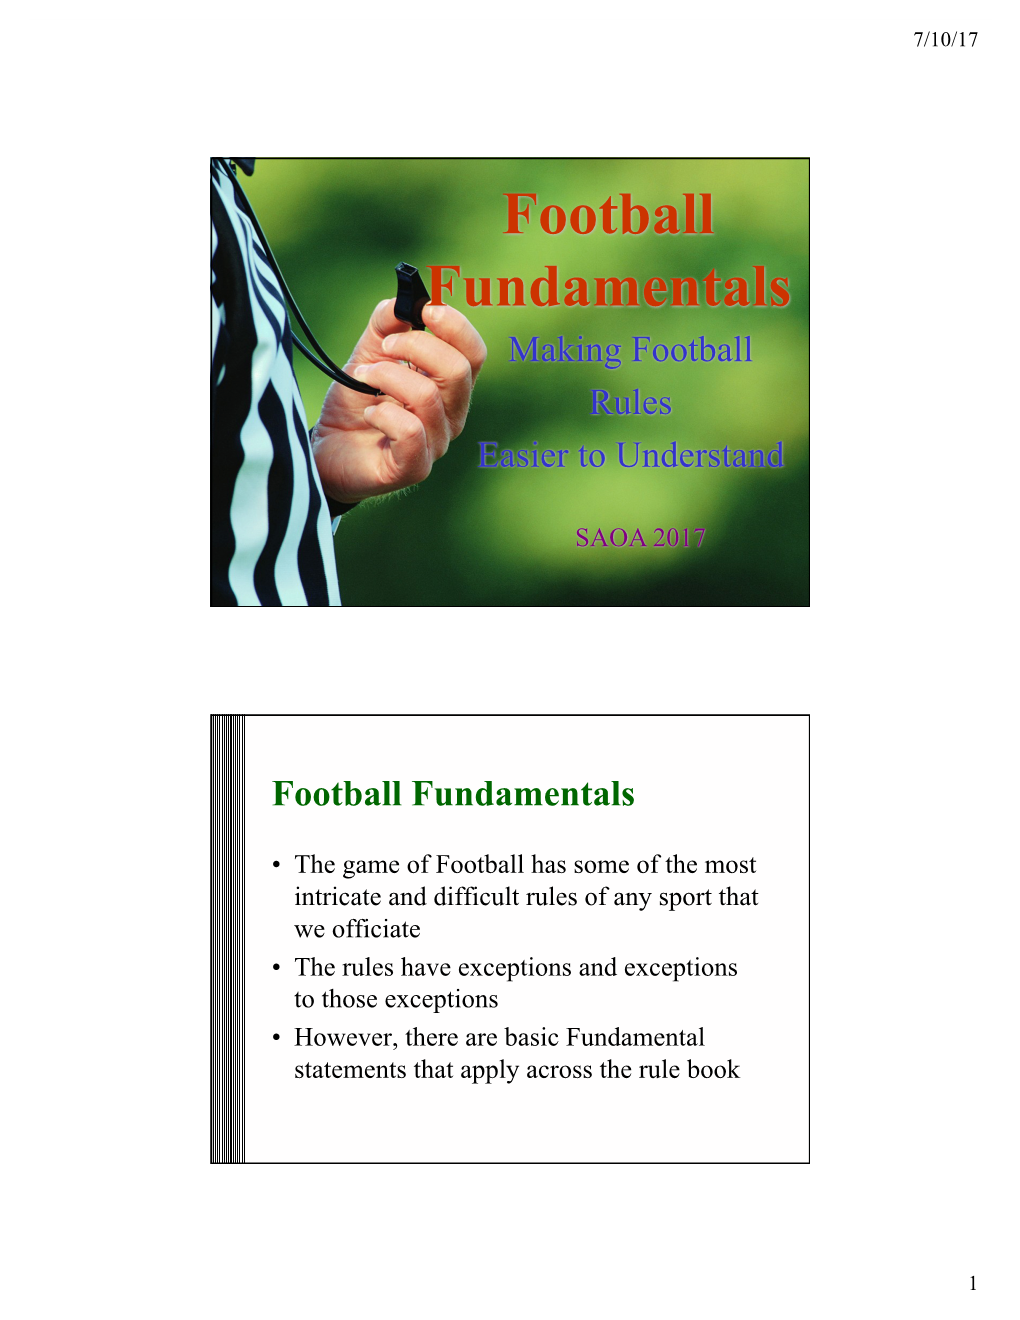 Football Fundamentals Making Football Rules Easier to Understand